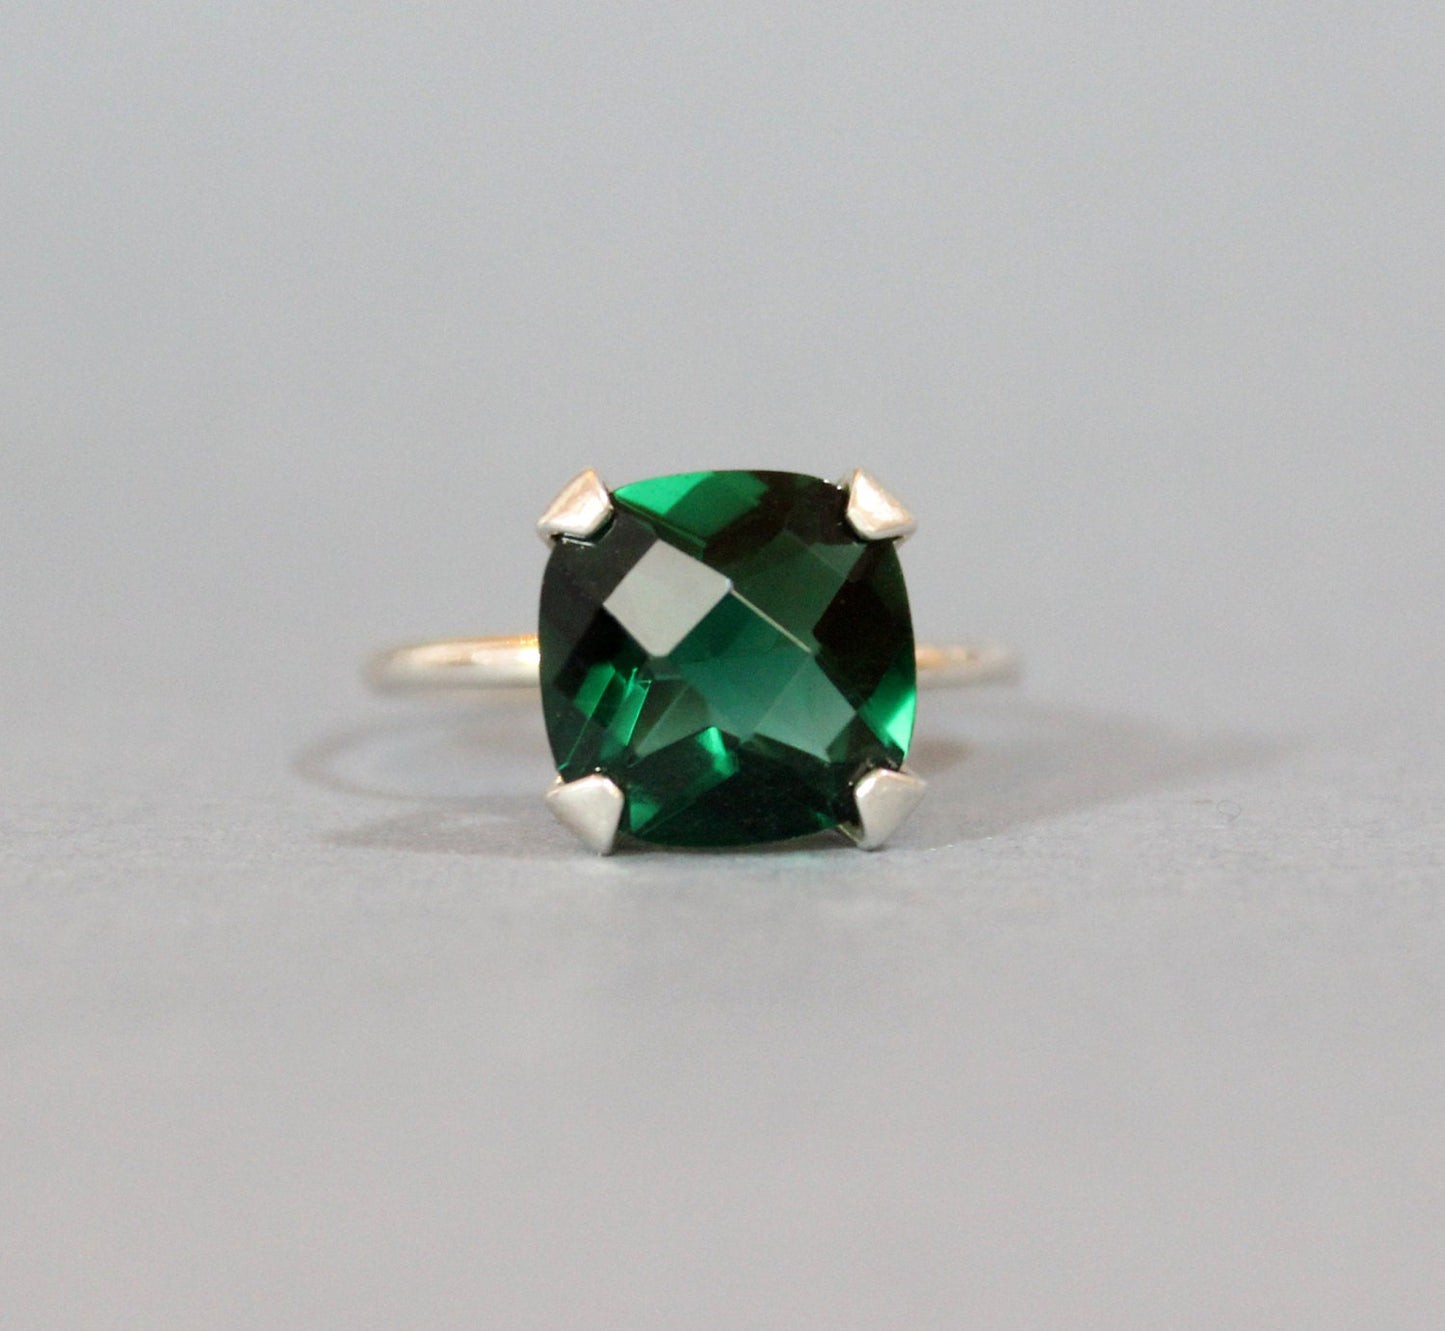 Sterling Silver and Emerald Cubic Zirconia Ring - Cushion Cut CZ - .925 Sterling Silver Ring